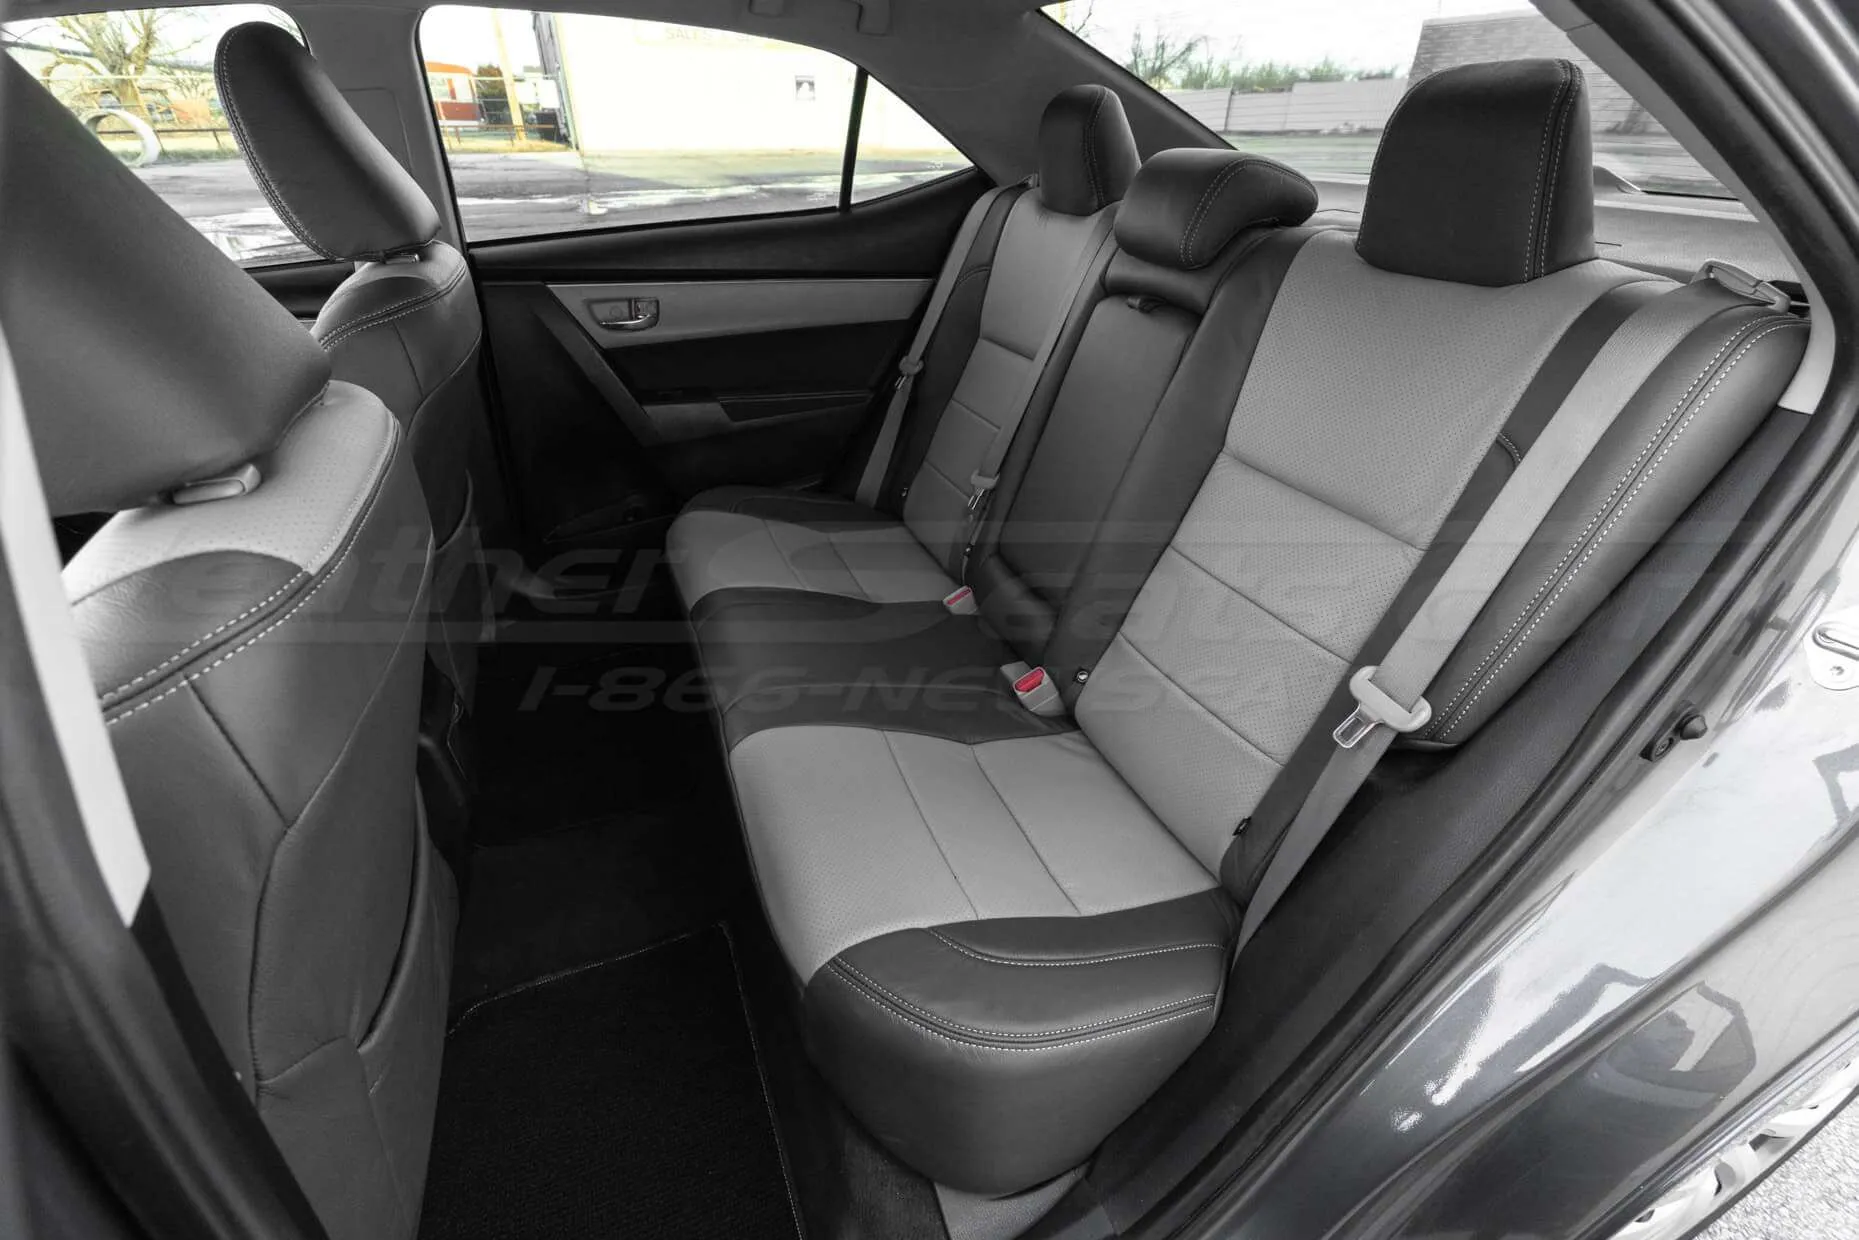 Toyota Corolla rear leather seats installed- driver side